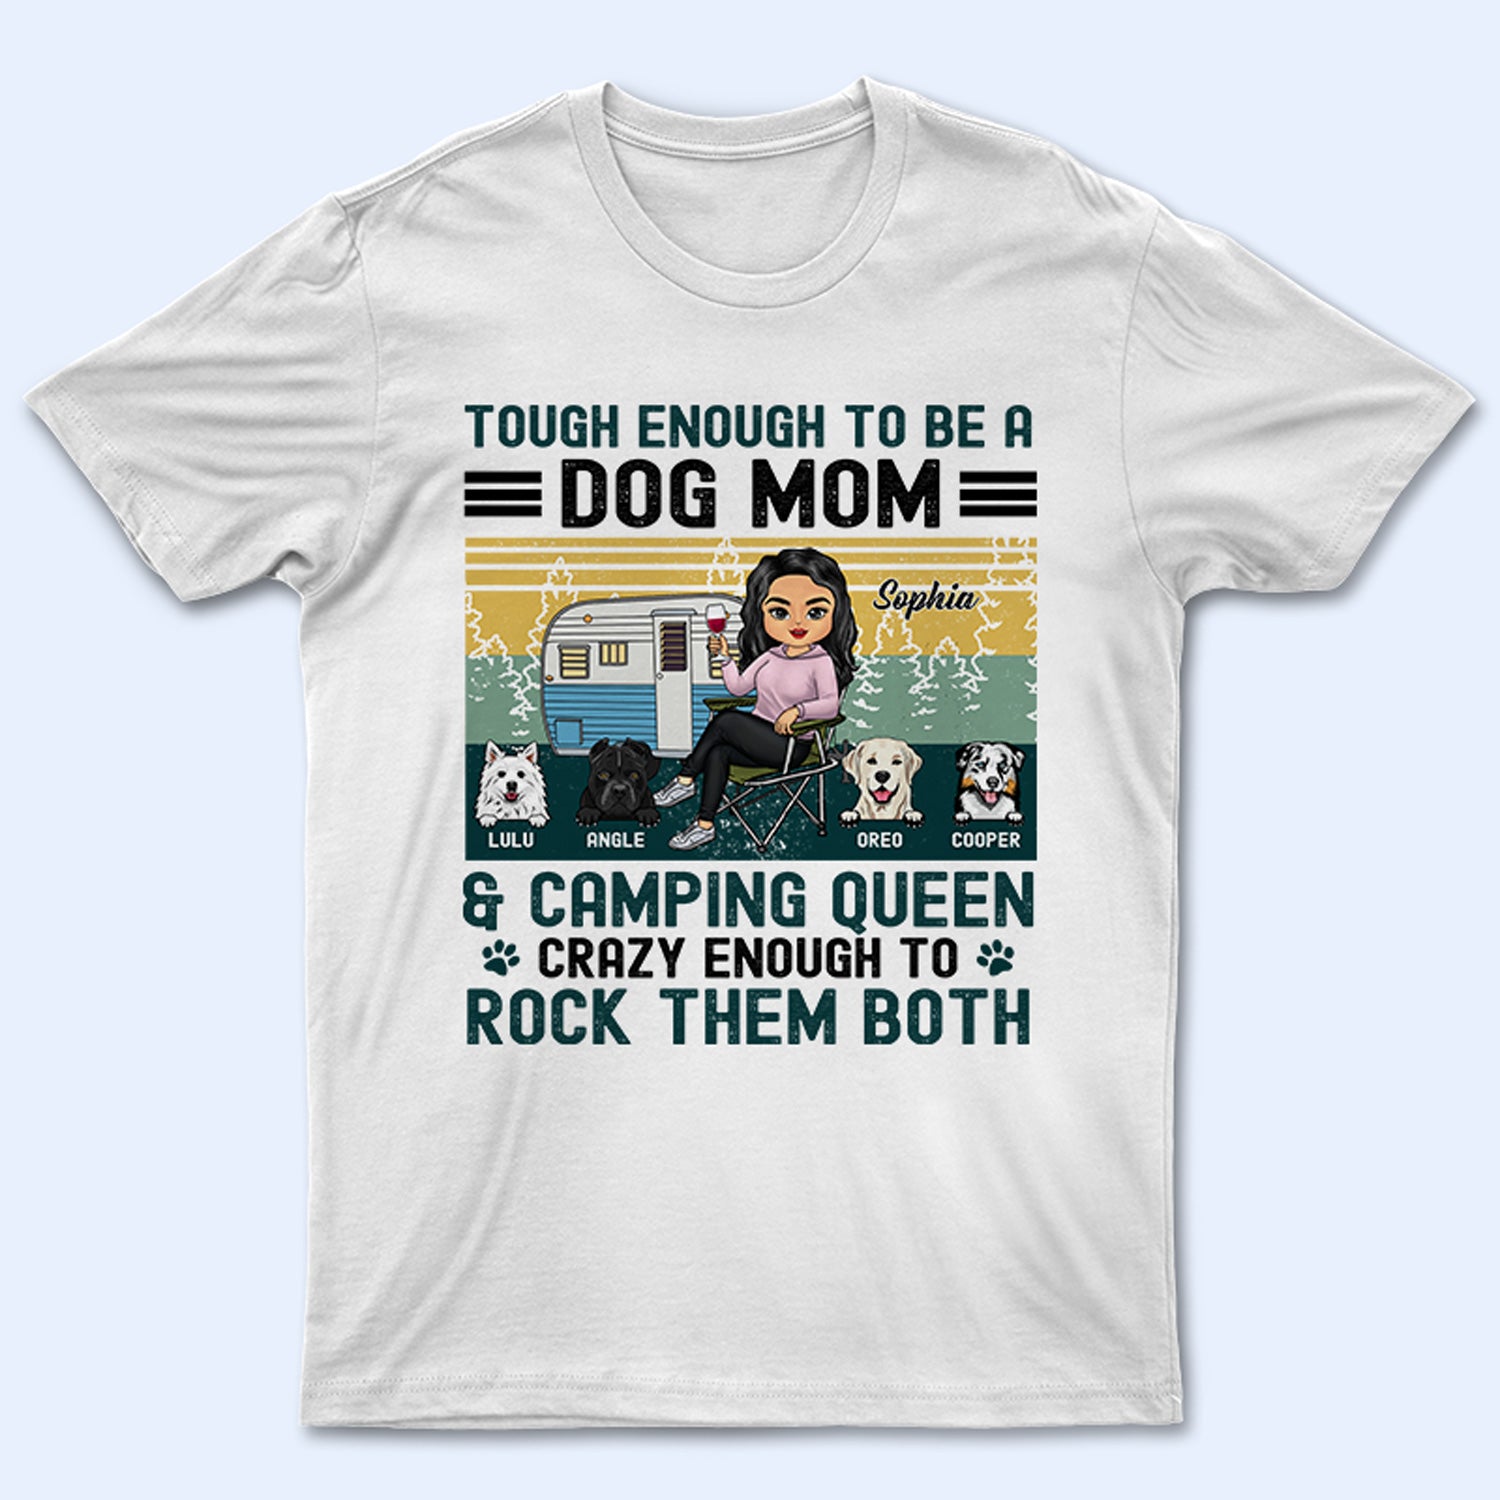 Tough Enough To Be A Dog Mom - Gift For Camping Dog Lover - Personalized Custom T Shirt